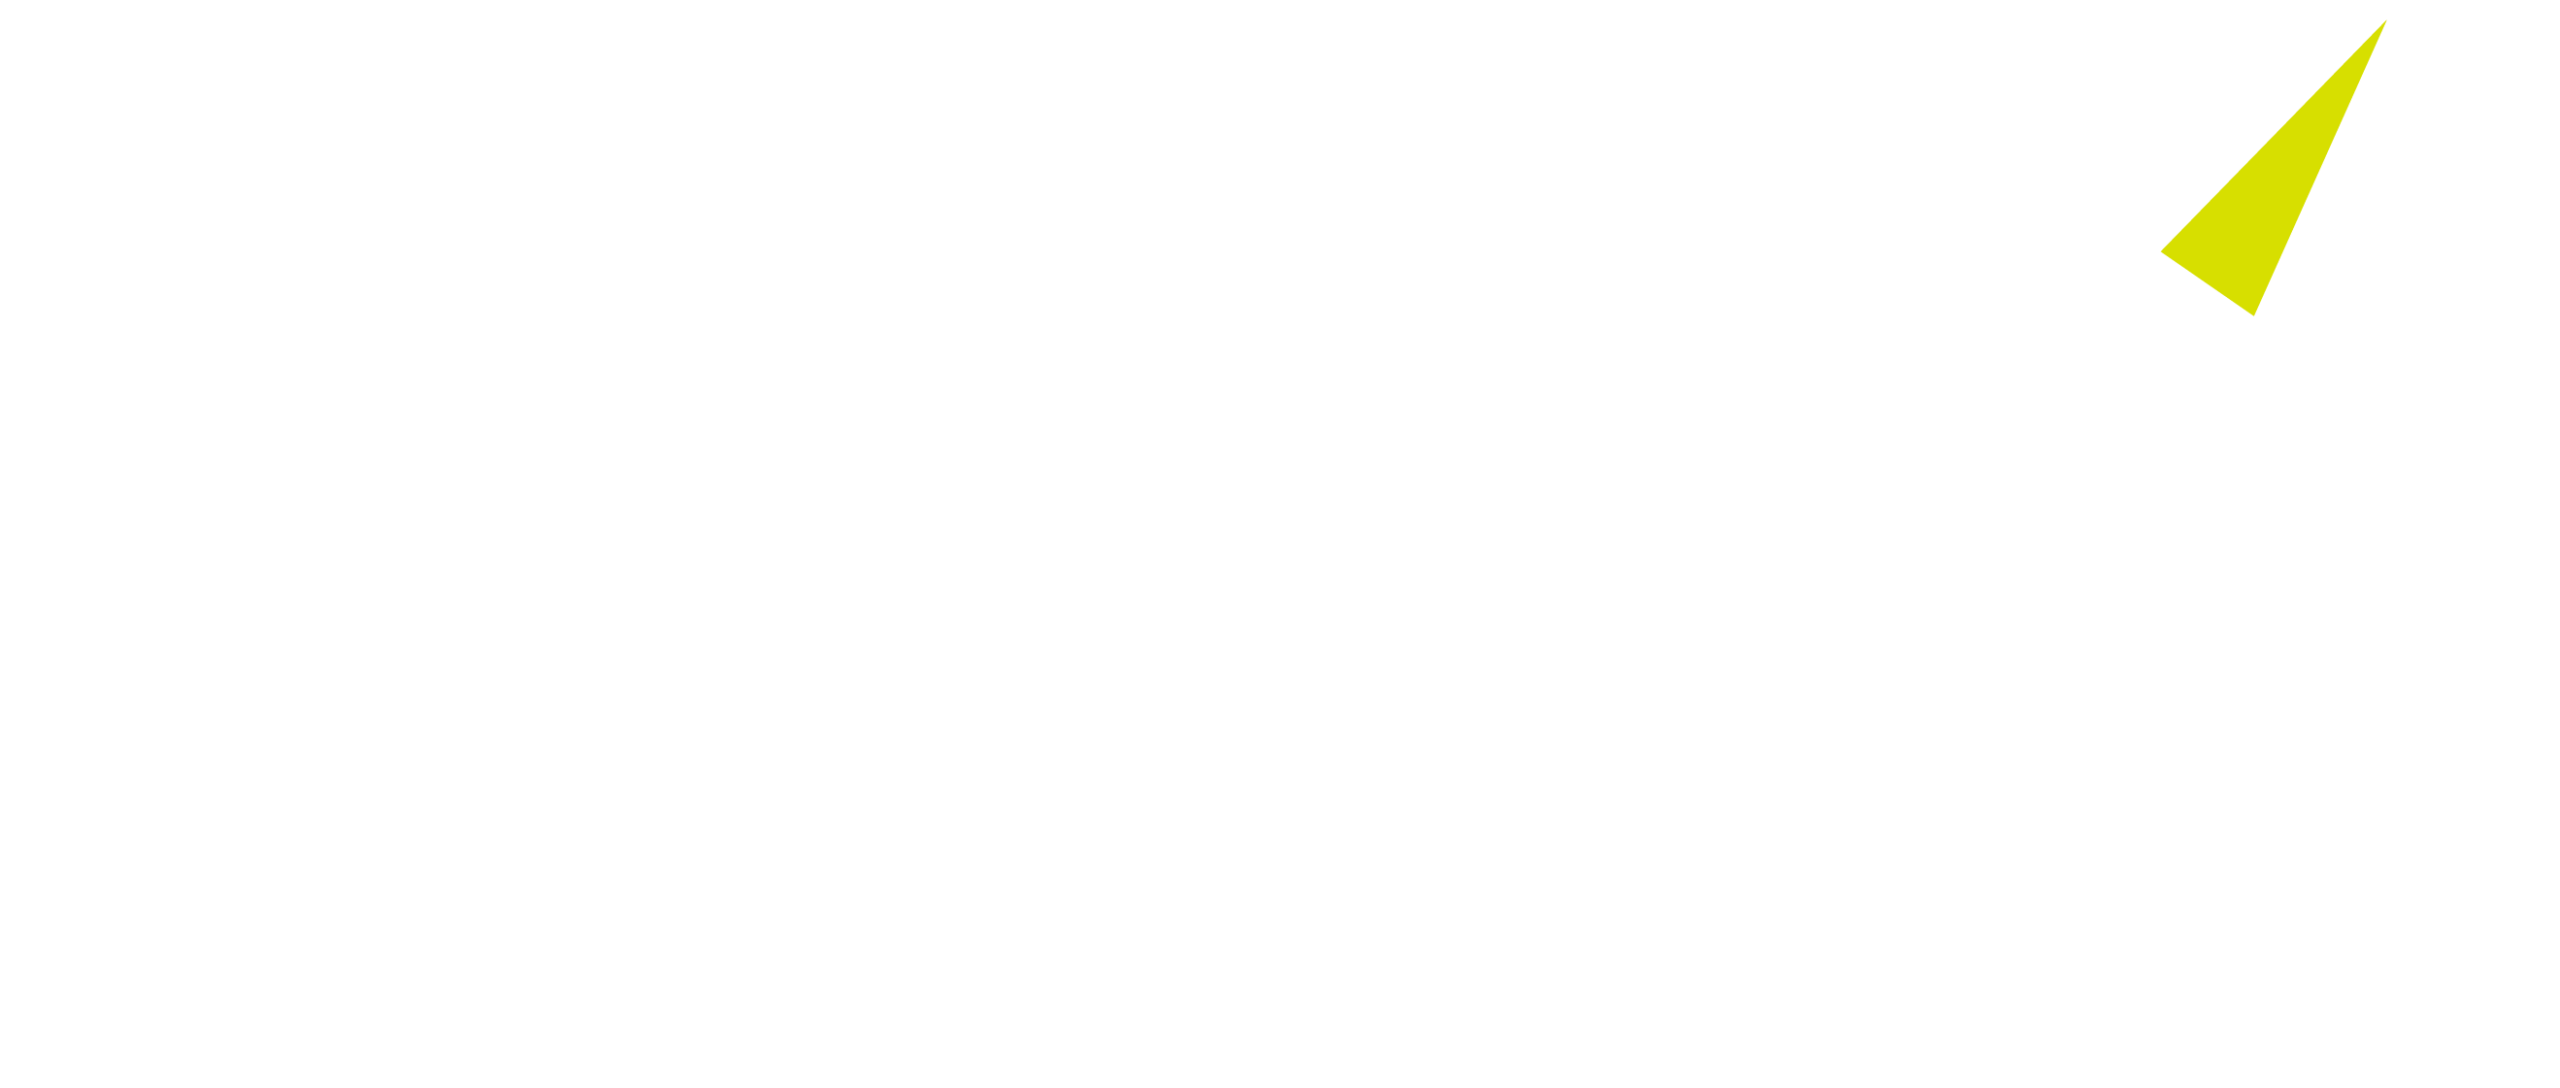 30 Cents Consulting LLP Logo